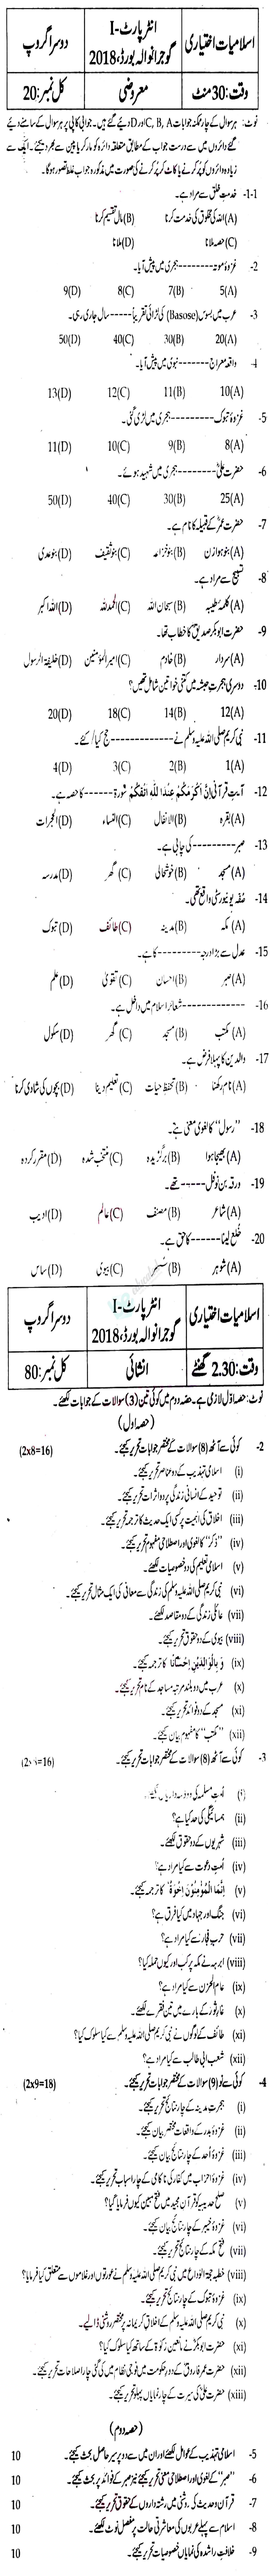 Islamiat Elective FA Part 1 Past Paper Group 2 BISE Gujranwala 2018